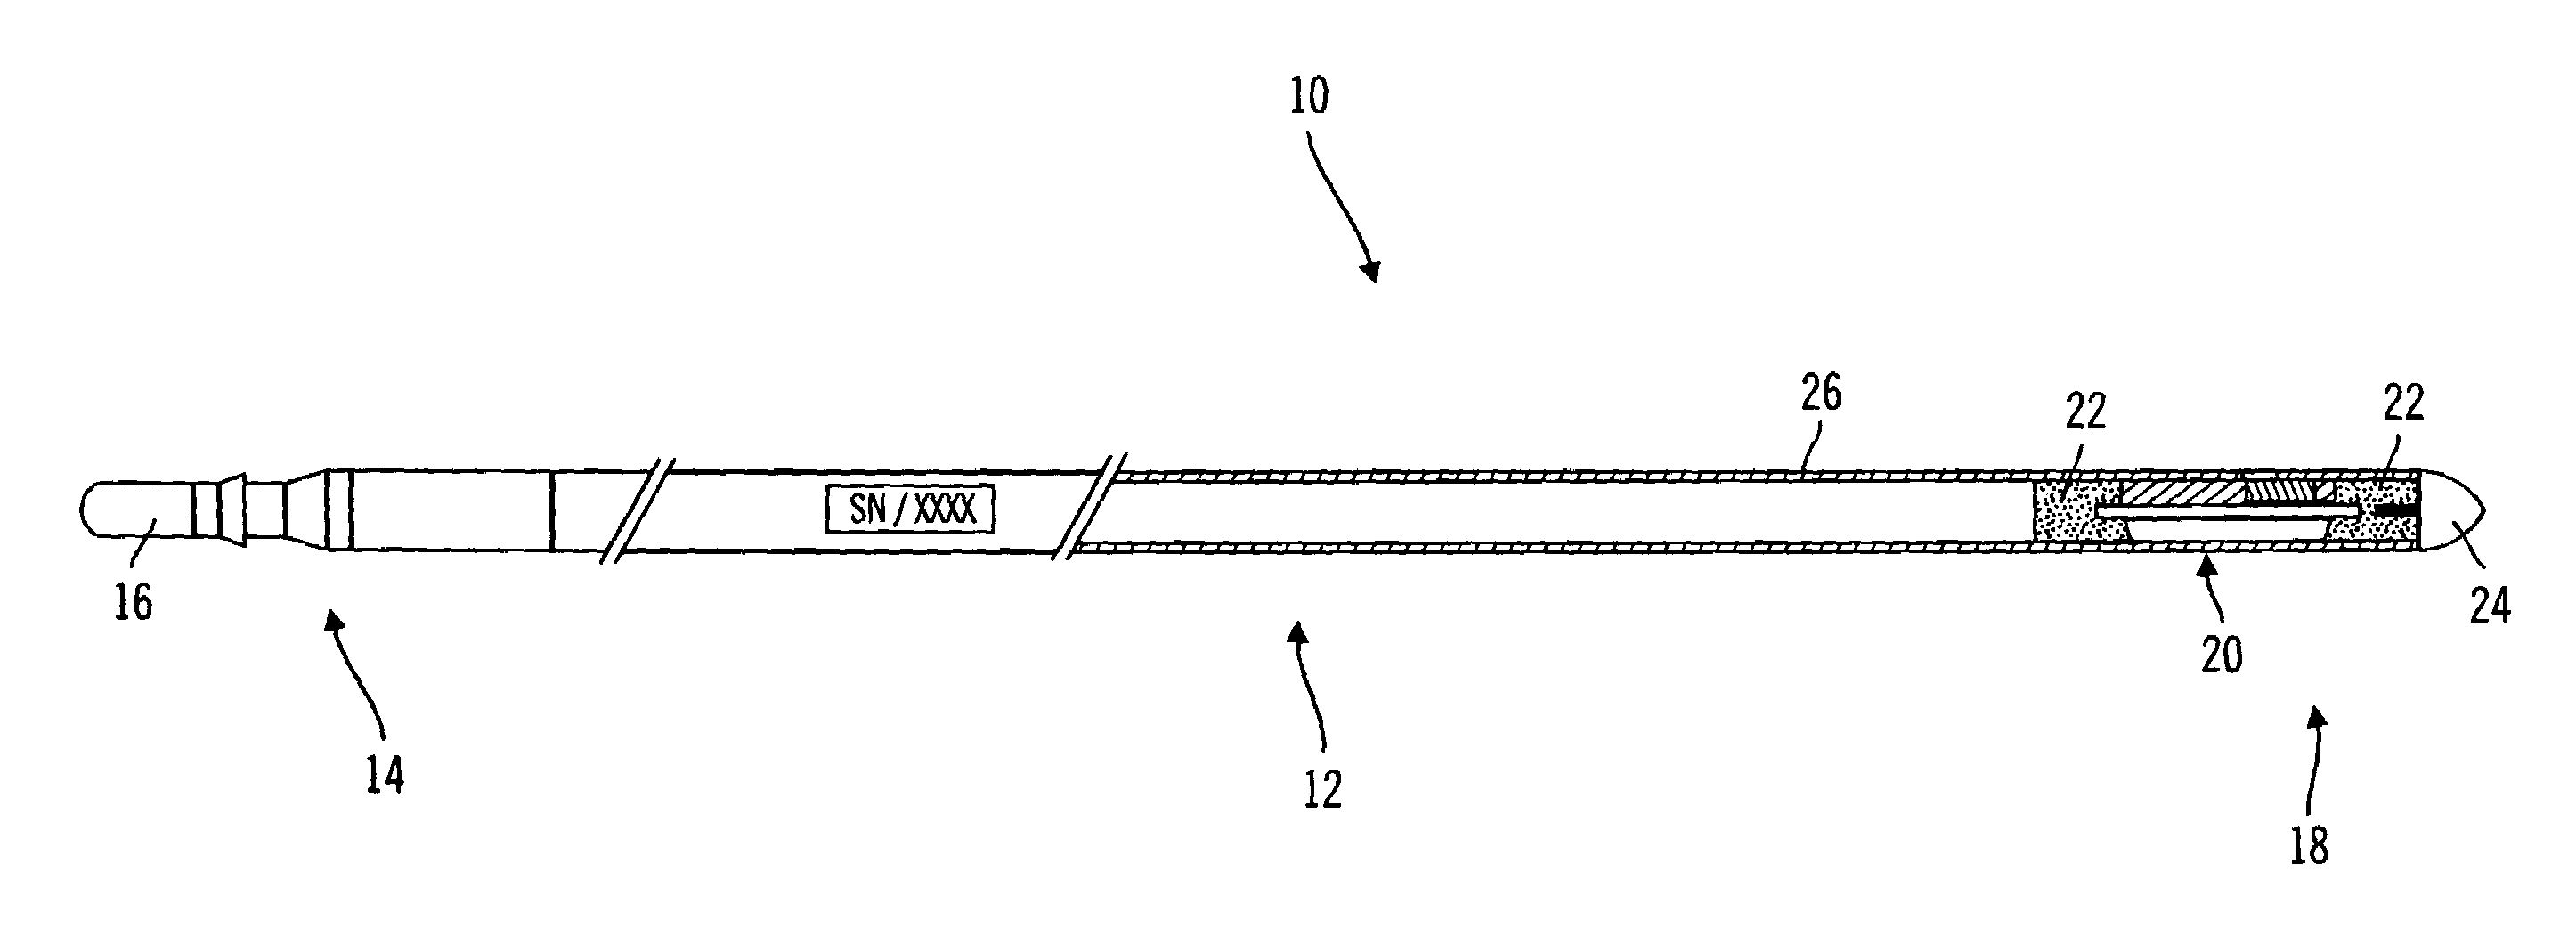 Method and apparatus for enhancing the integrity of an implantable sensor device